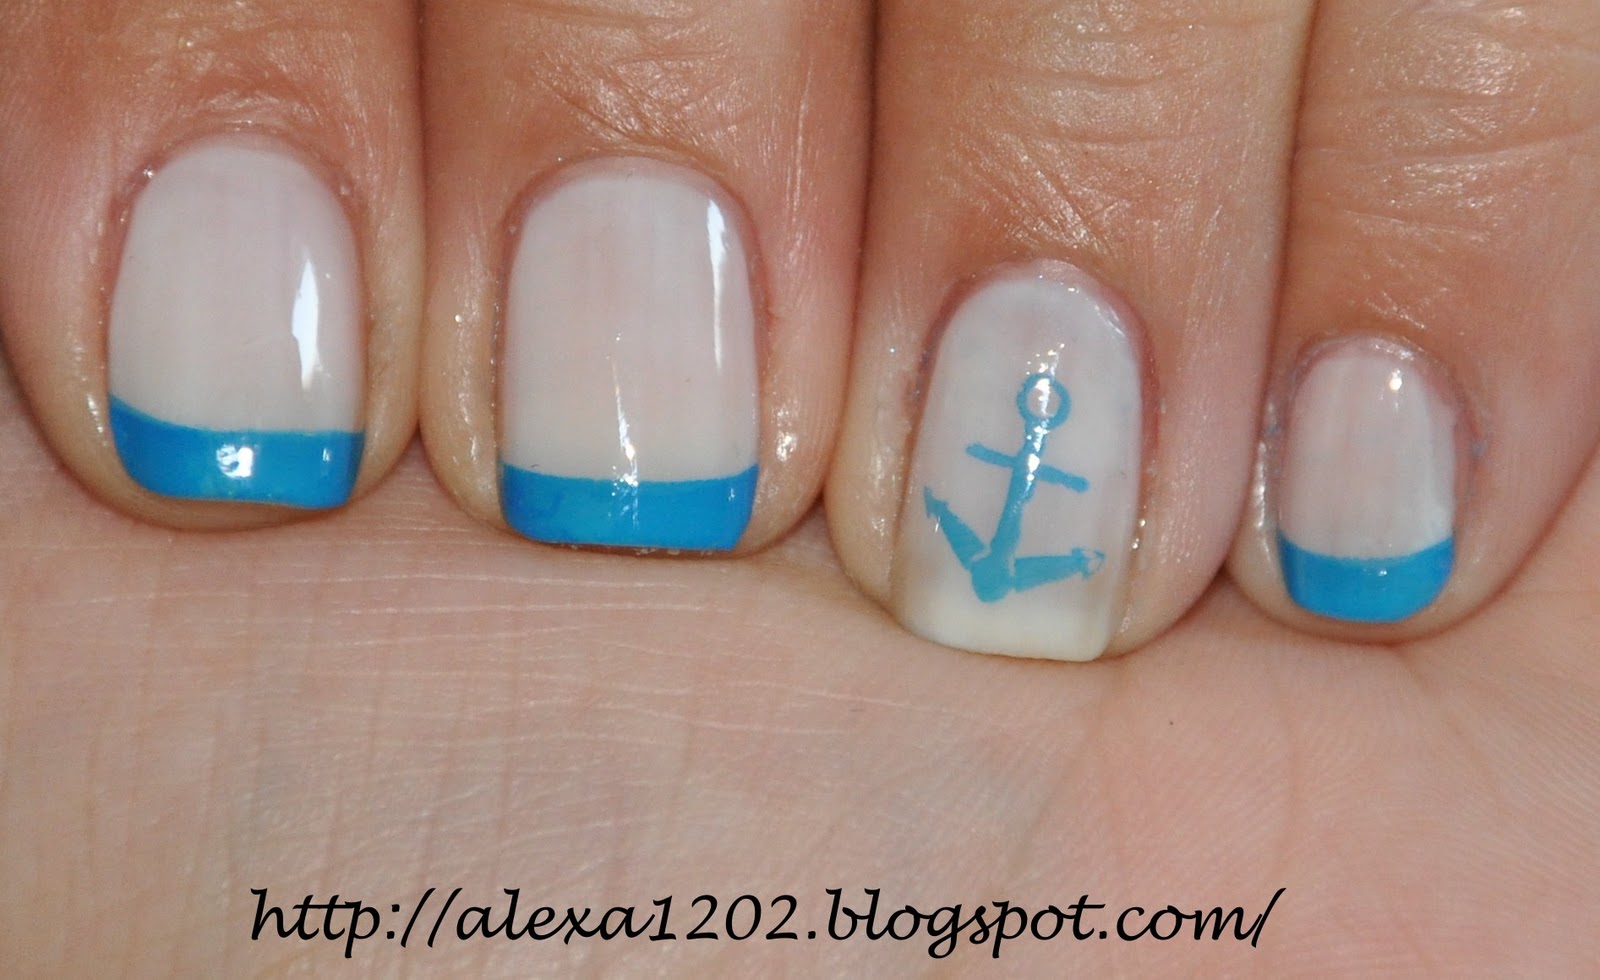 Addicted to Konad: NOTD & KOTD: Blue french tips and anchors!